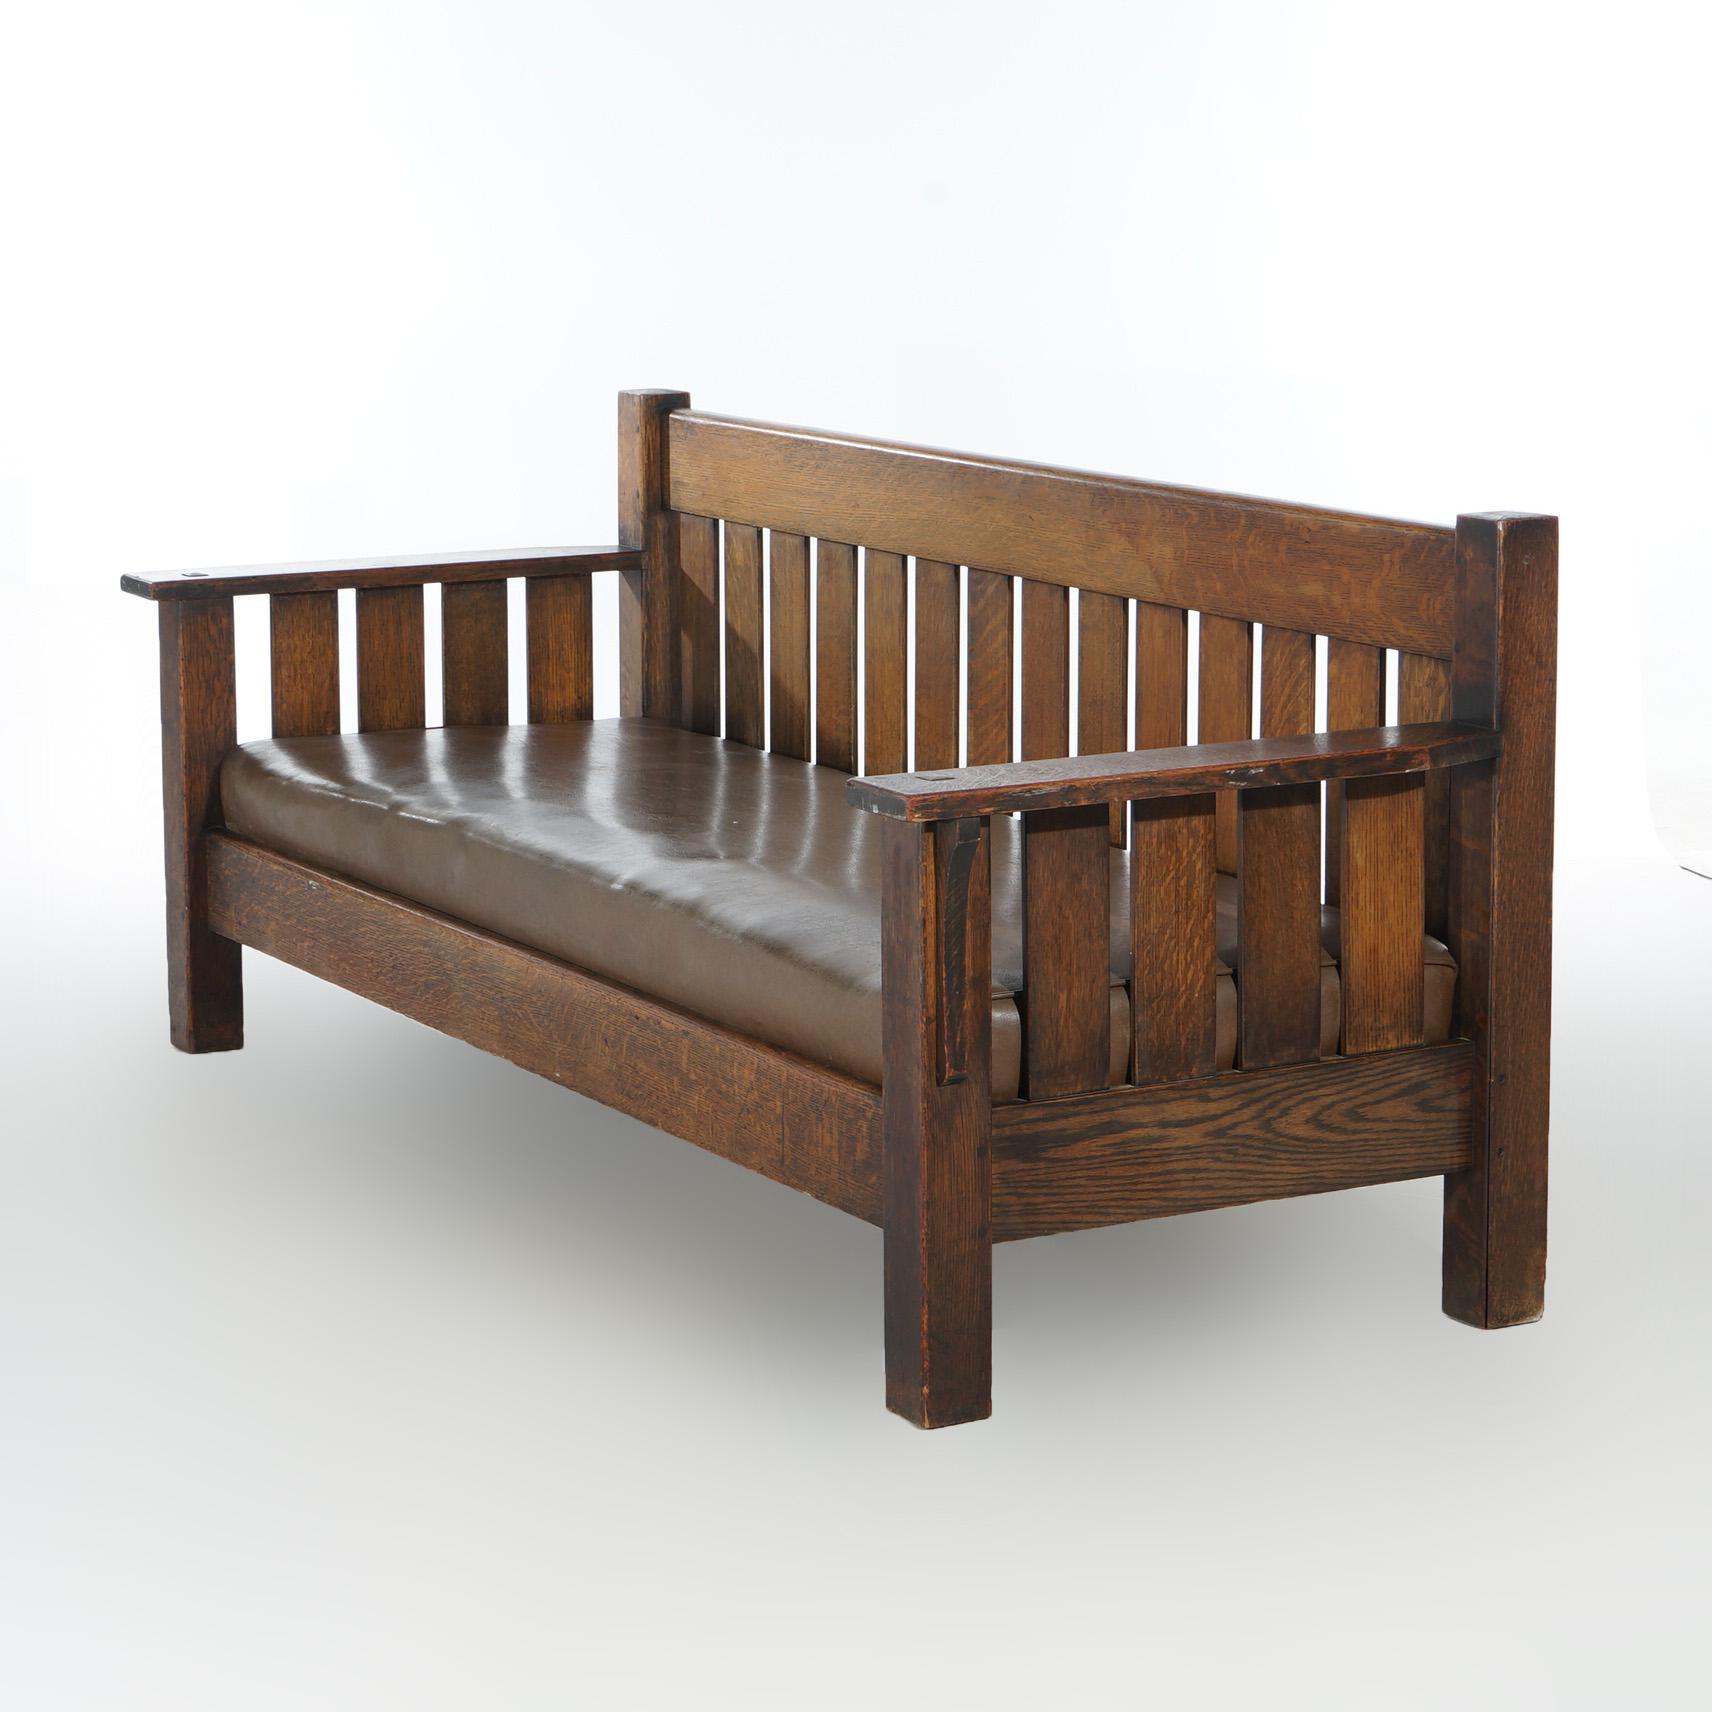 Upholstery Arts & Crafts JM Young Mission Oak Slat-Back Settle with Cushion, C1910 For Sale